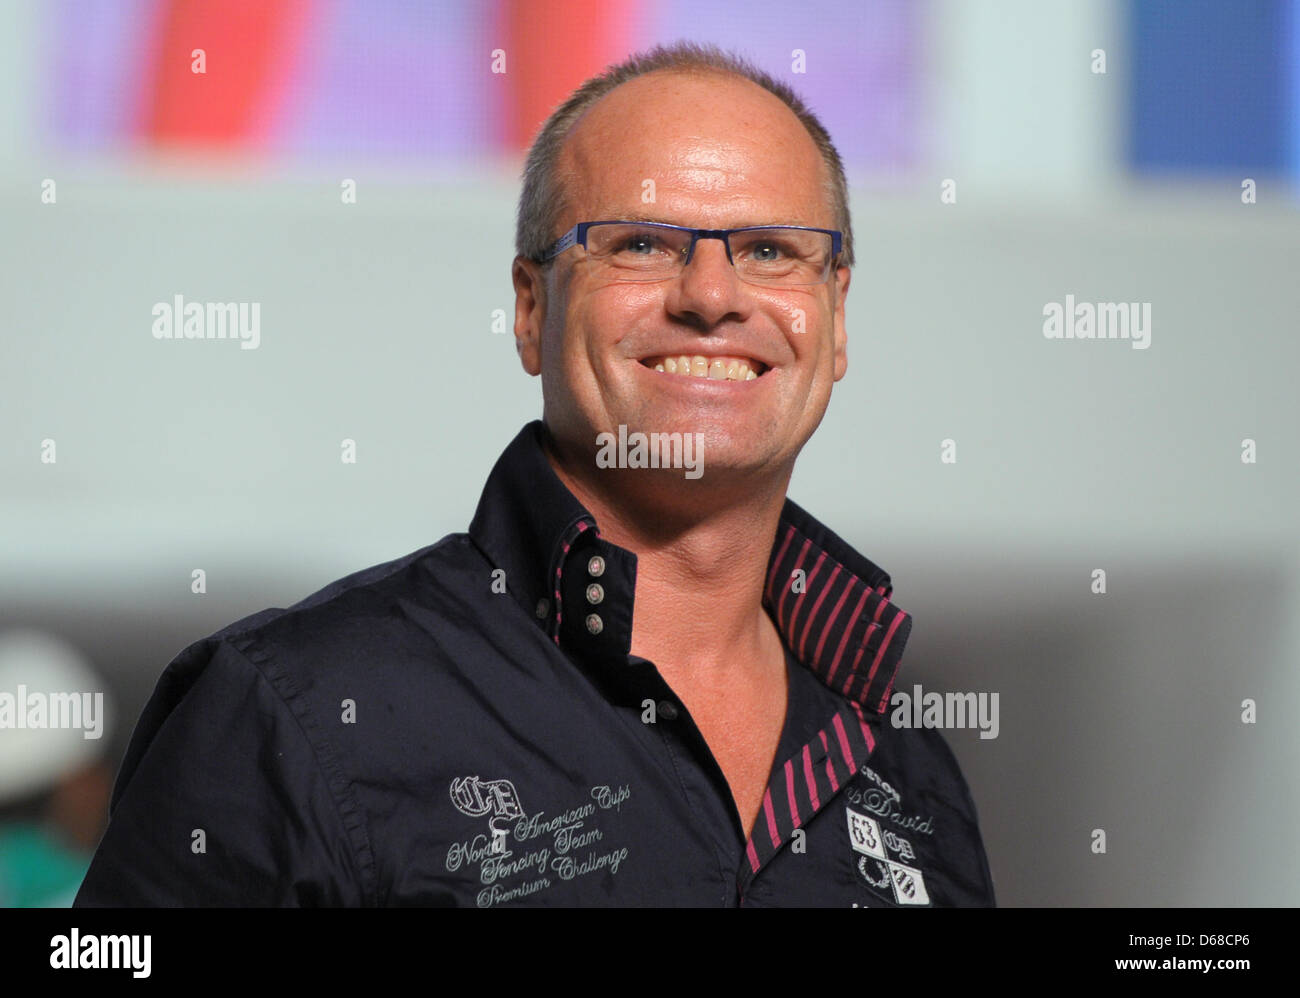 CEO of Camp David Thomas Finkbeiner arrives at Camp David Show during the  Fashion Week in the Olympic Stadium in Berlin, Germany, 05 July 2012. The  presentation of the Spring/Summer 2013 collections